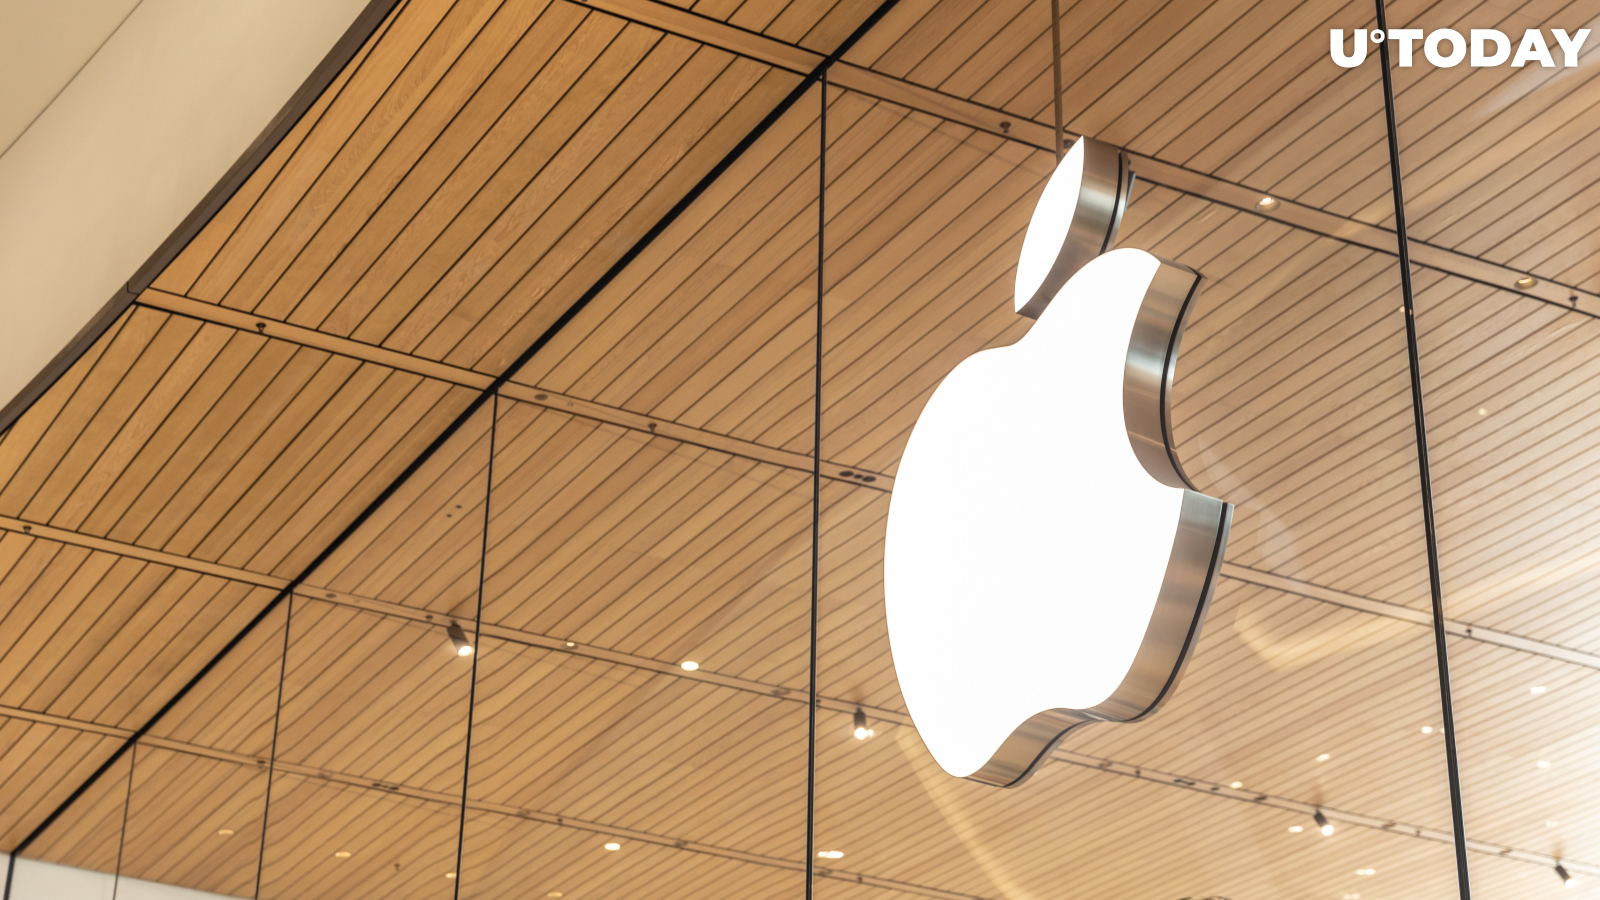 Apple CEO Says He Owns Crypto In Response to Question About Bitcoin and Ether